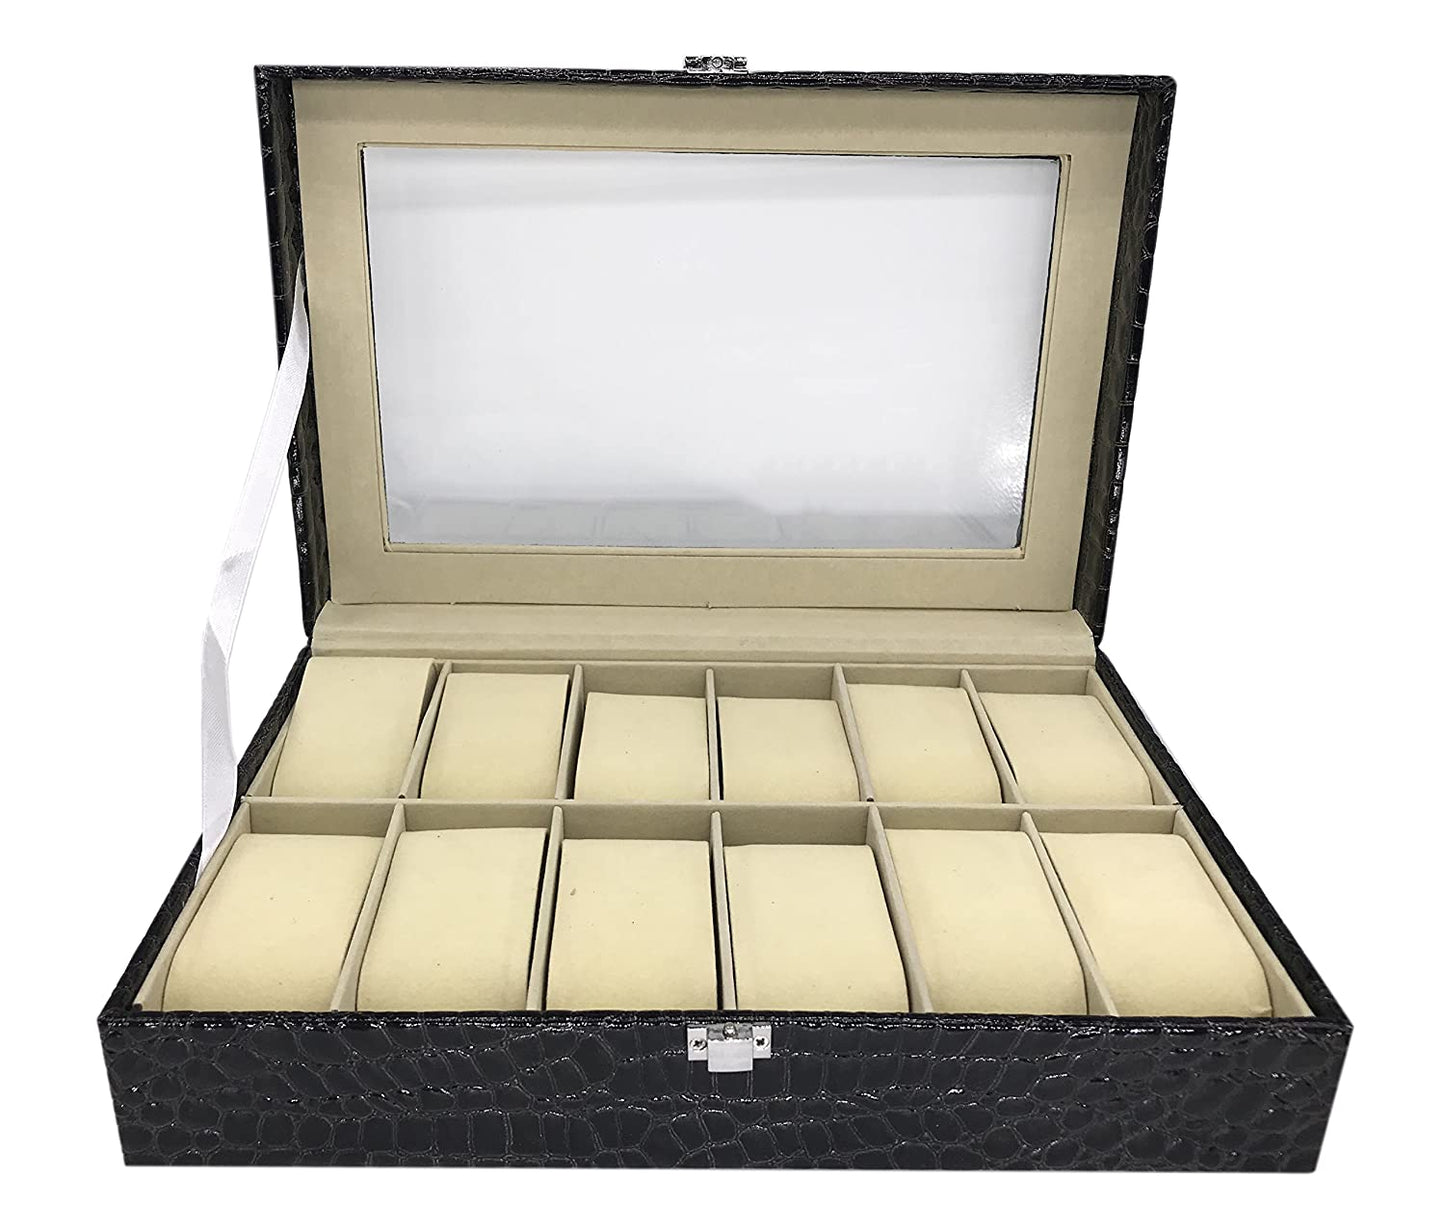 Watch Box For Pu Leather Design Display Case 12 Slot Large Holder